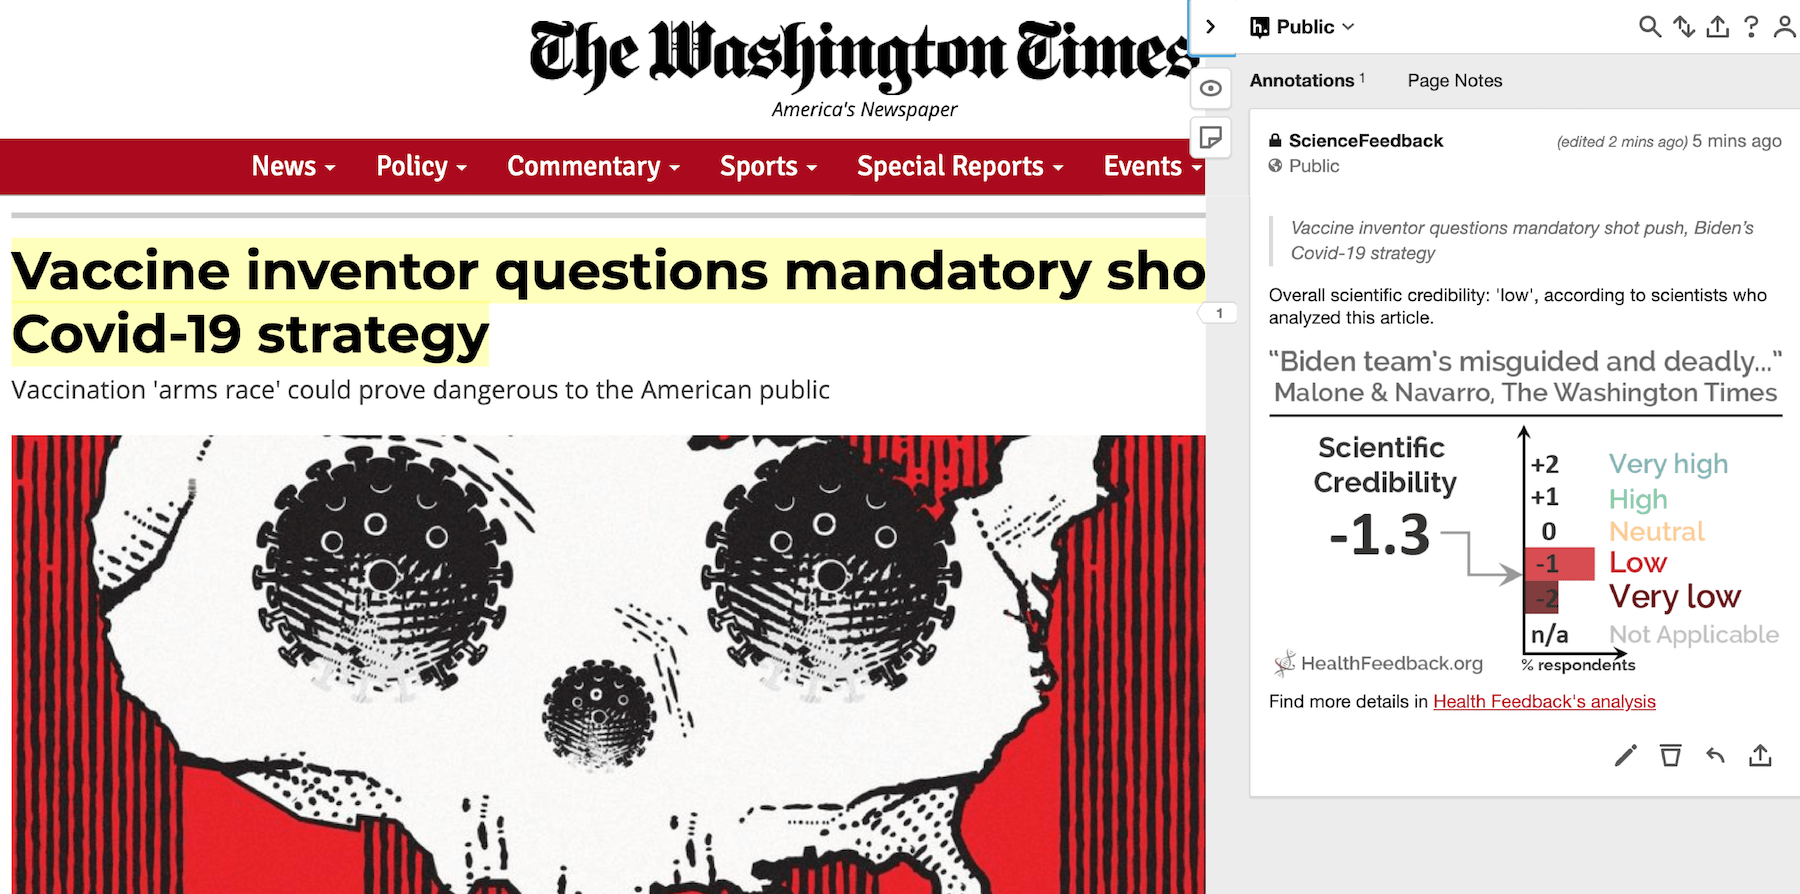 Washington Times Article By Robert Malone And Peter Navarro Relies On Inaccurate And Unsubstantiated Claims About Virus Evolution Vaccine Immunity And Covid 19 Vaccine Safety Health Feedback